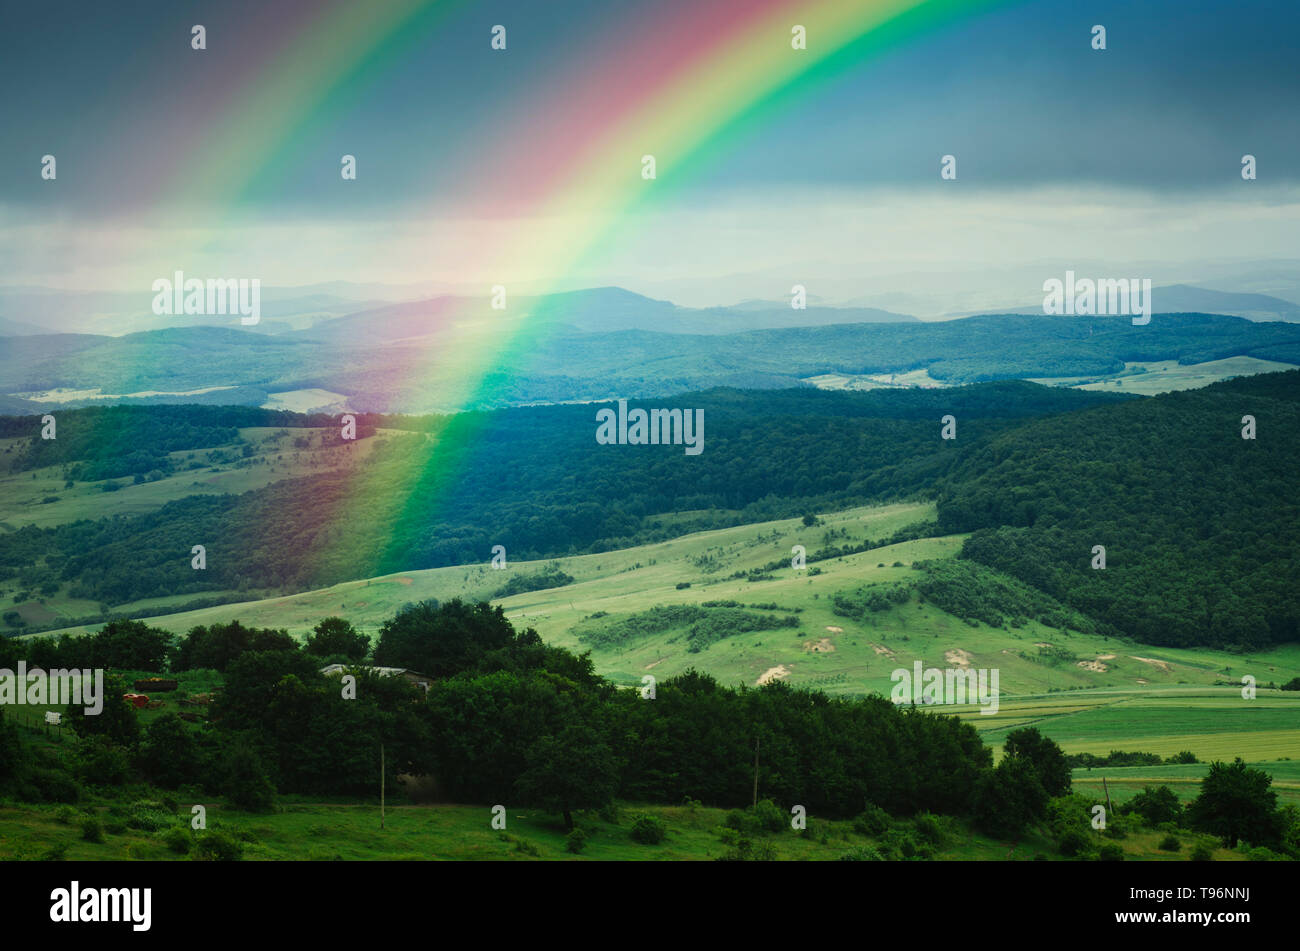 double rainbow over hills in rural landscape in Romania, Eastern Europe Stock Photo